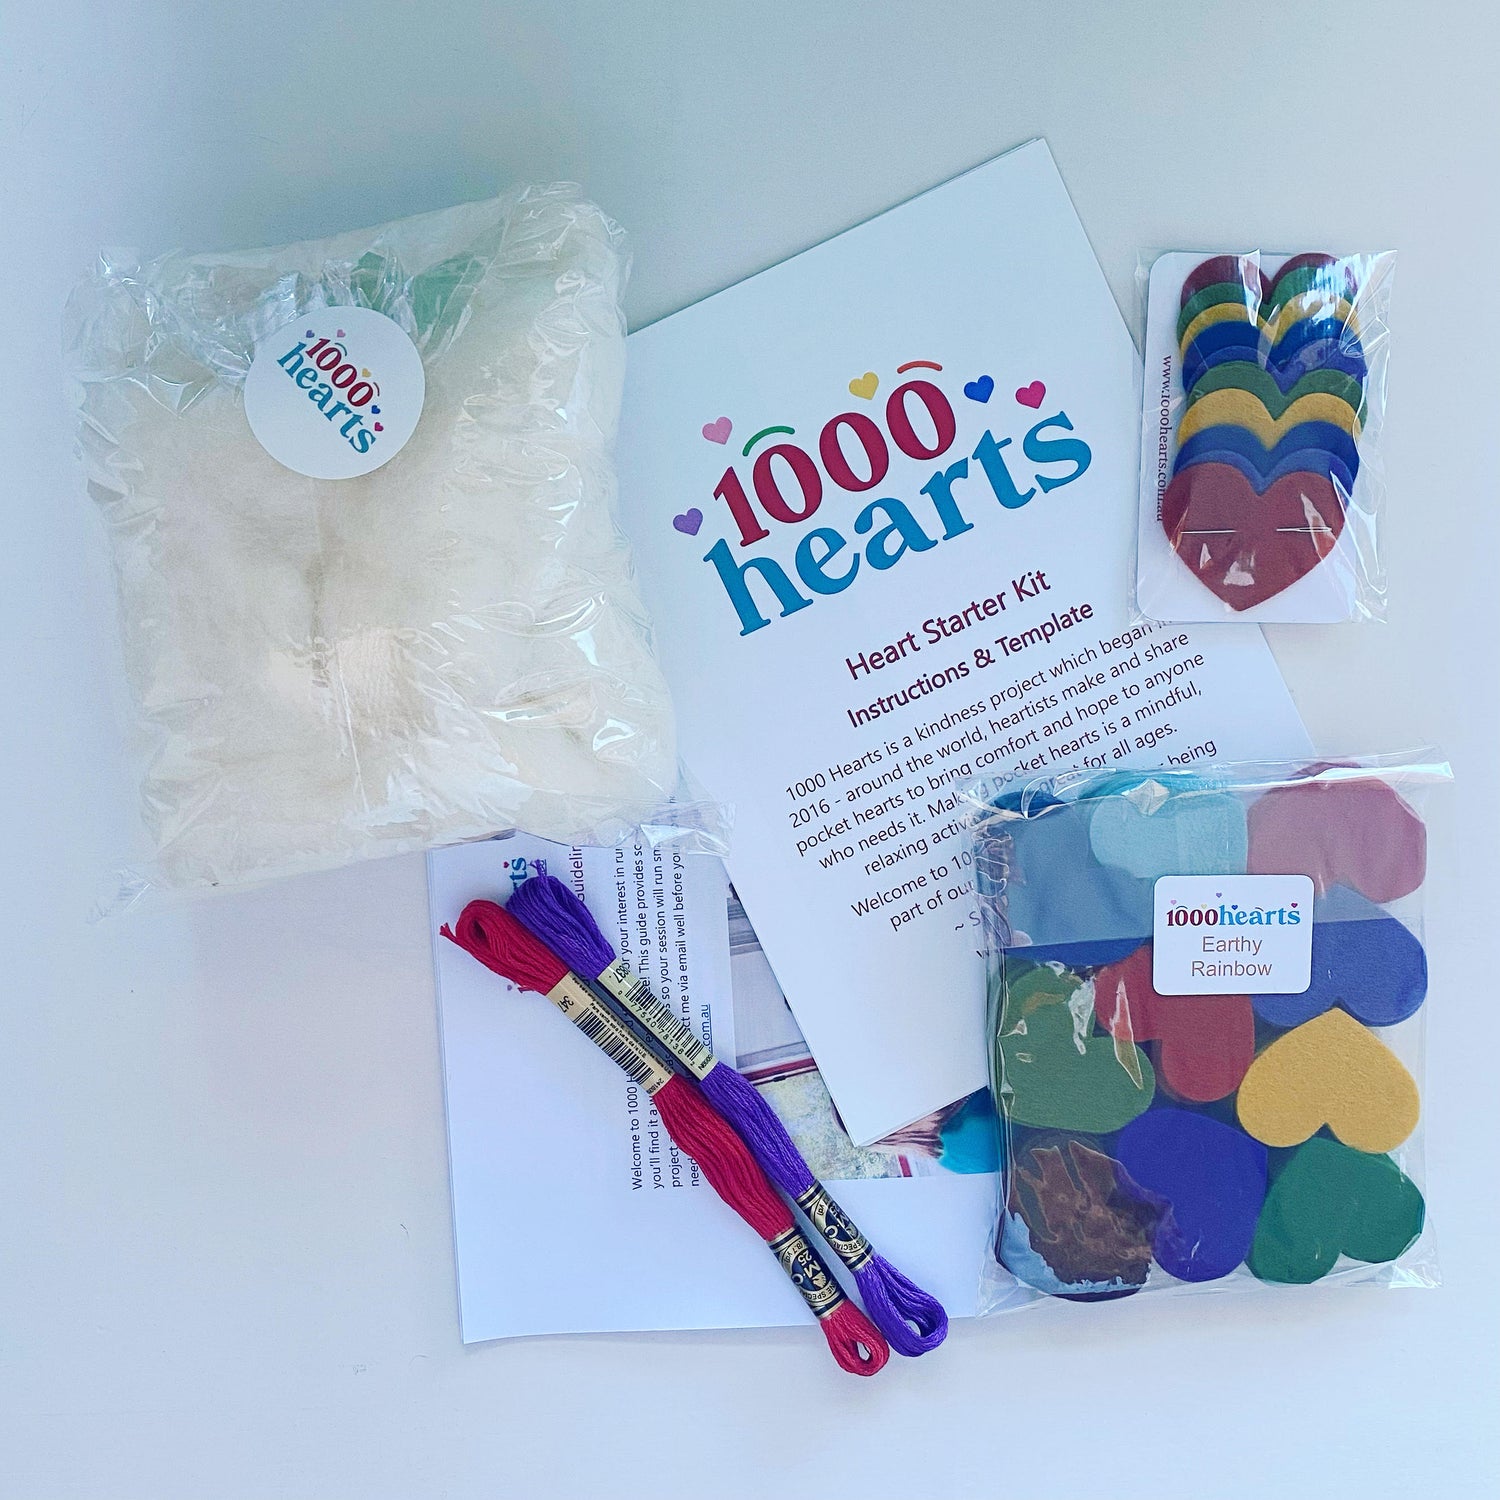 Group Heart-Making Kit with pre-cut hearts